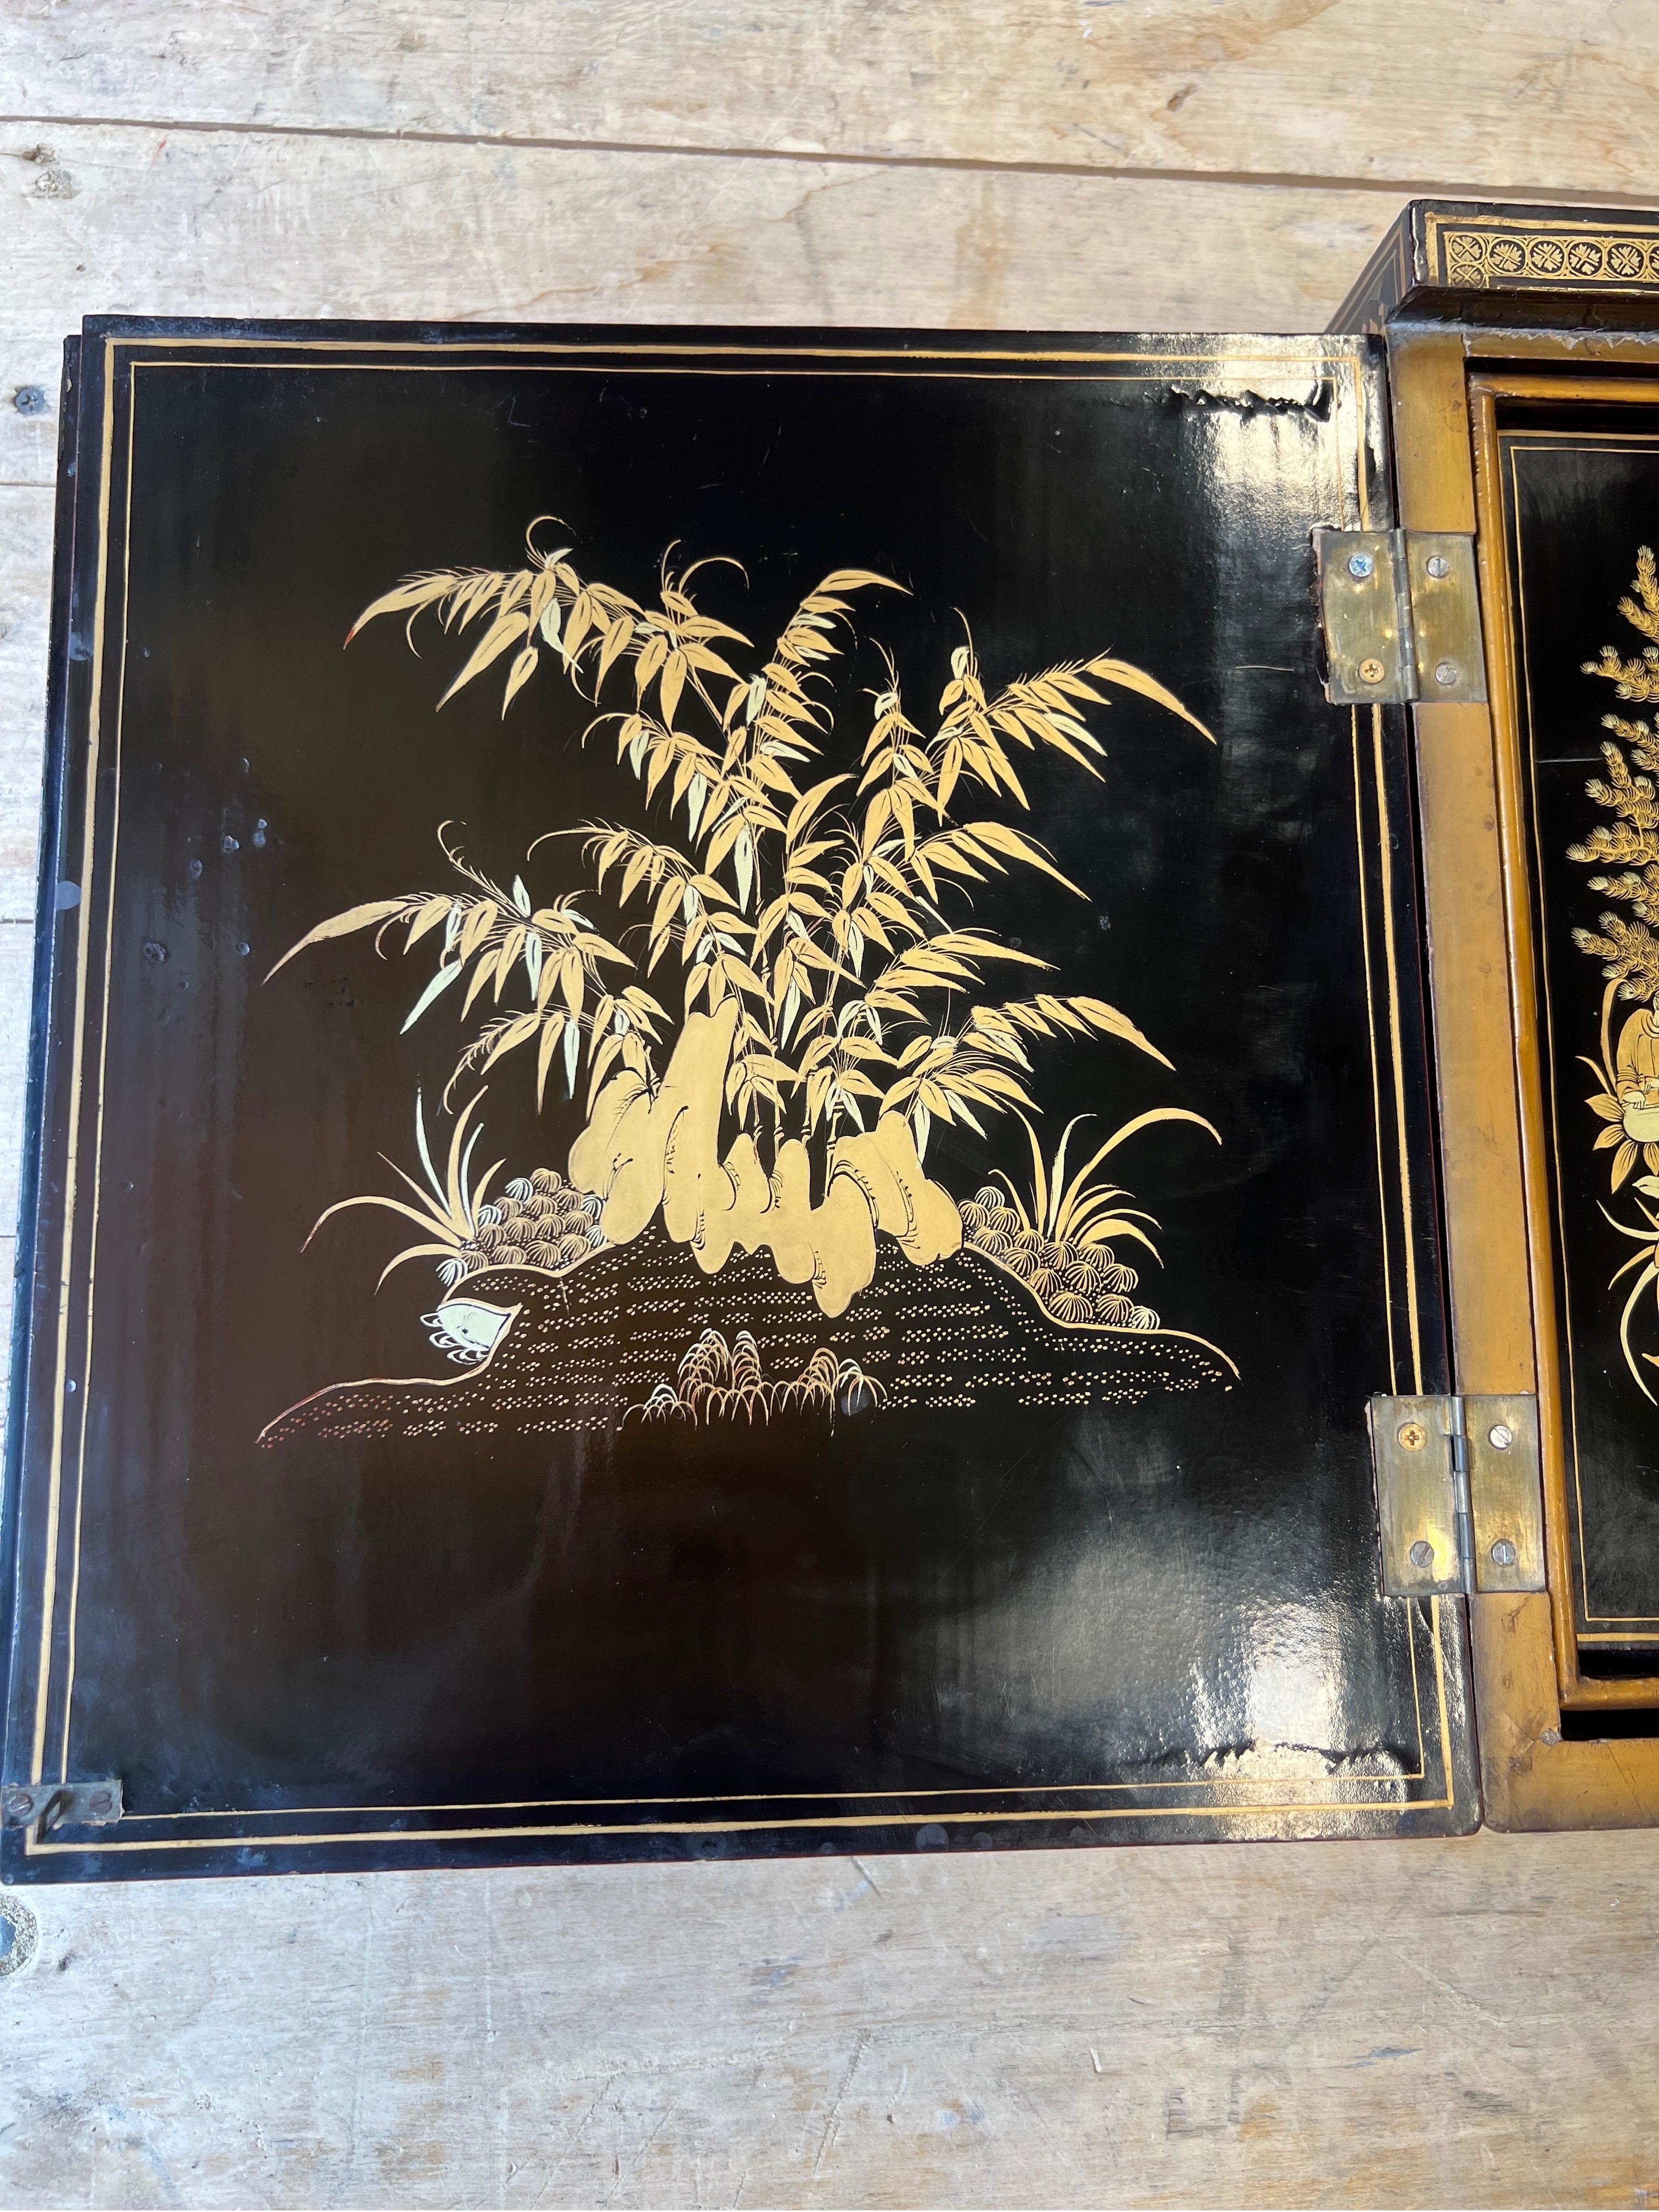 Exceptional Chinese Export Gilt Black Lacquer Chinoiserie Decorated Lap Desk  In Good Condition For Sale In Atlanta, GA